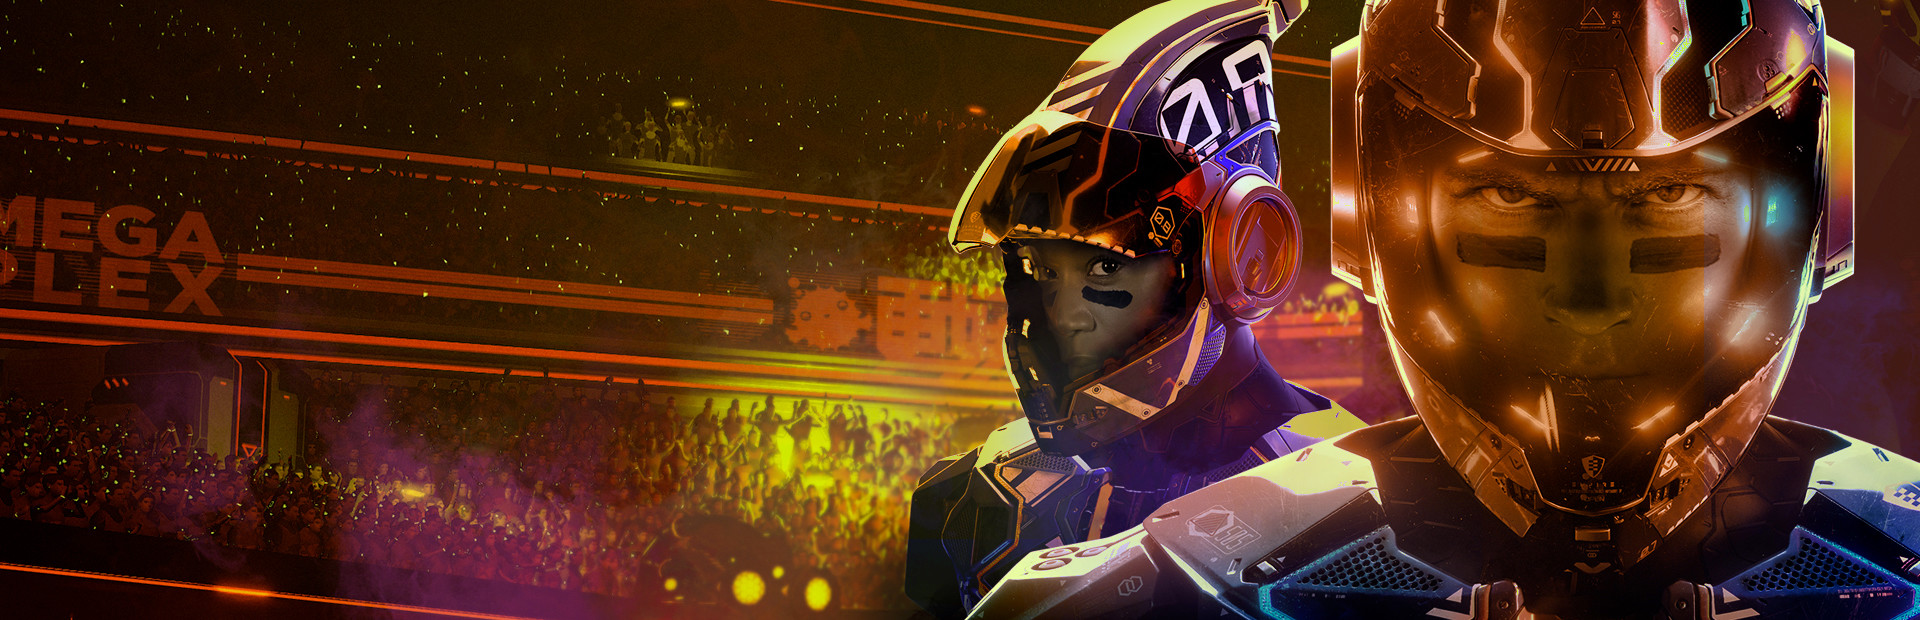 Laser League: World Arena cover image